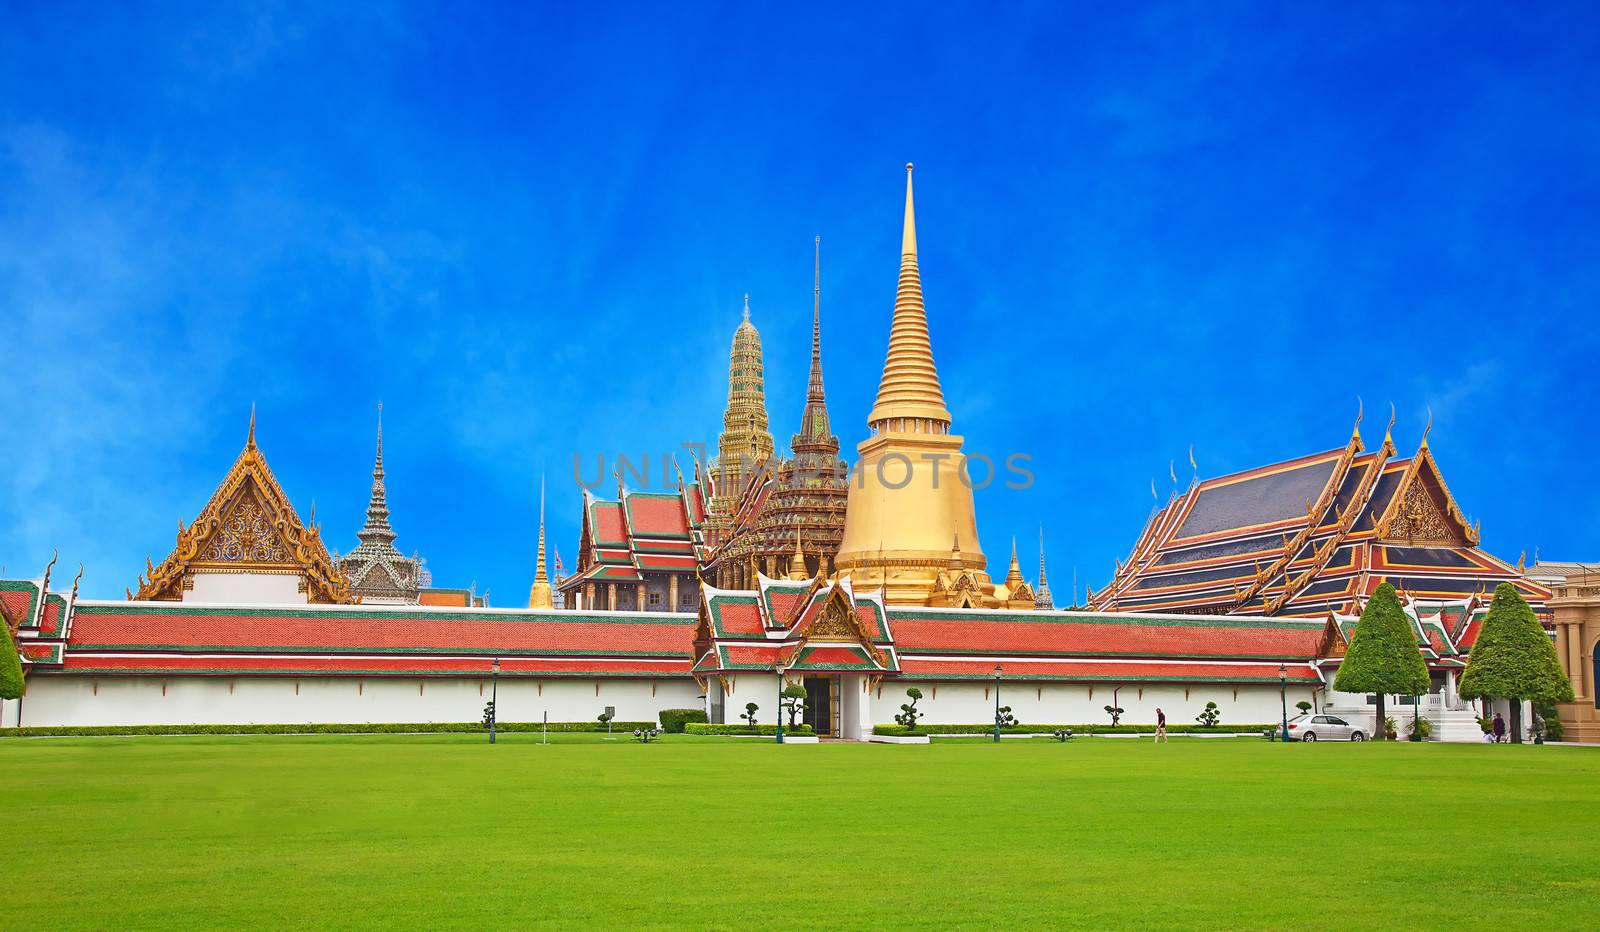 Grand Palace and Temple of Emerald Buddha complex in Bangkok, Thailand